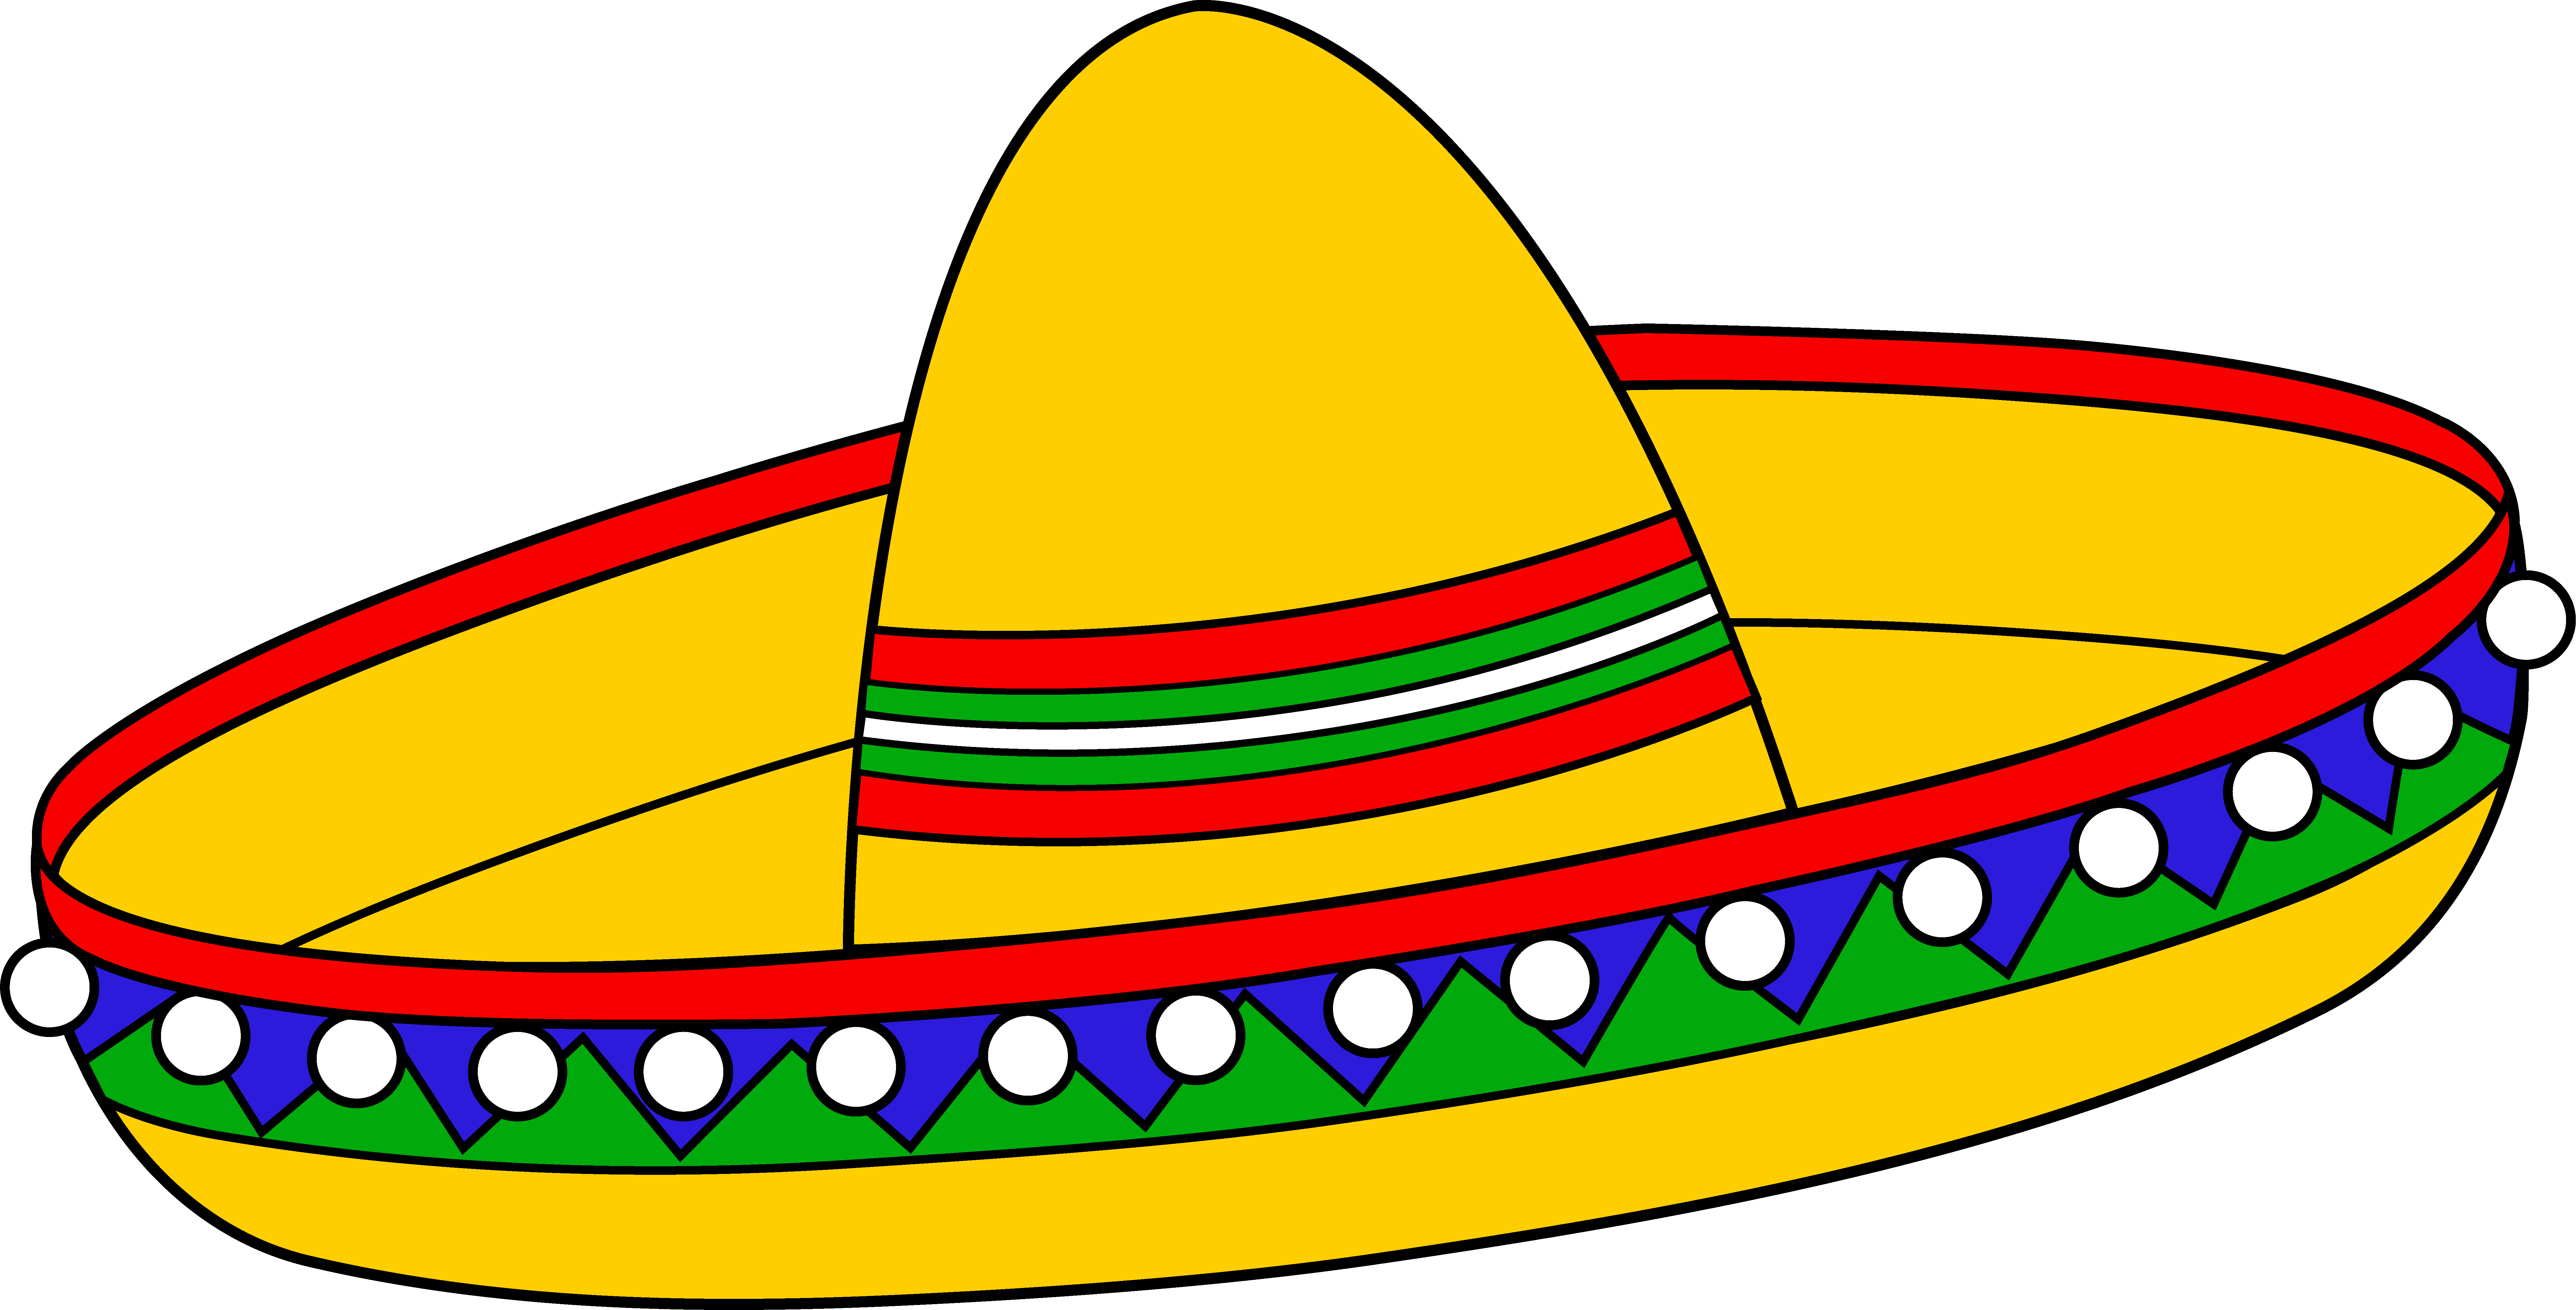 Clipart banner fiesta. Colorful mexican sombrero hat